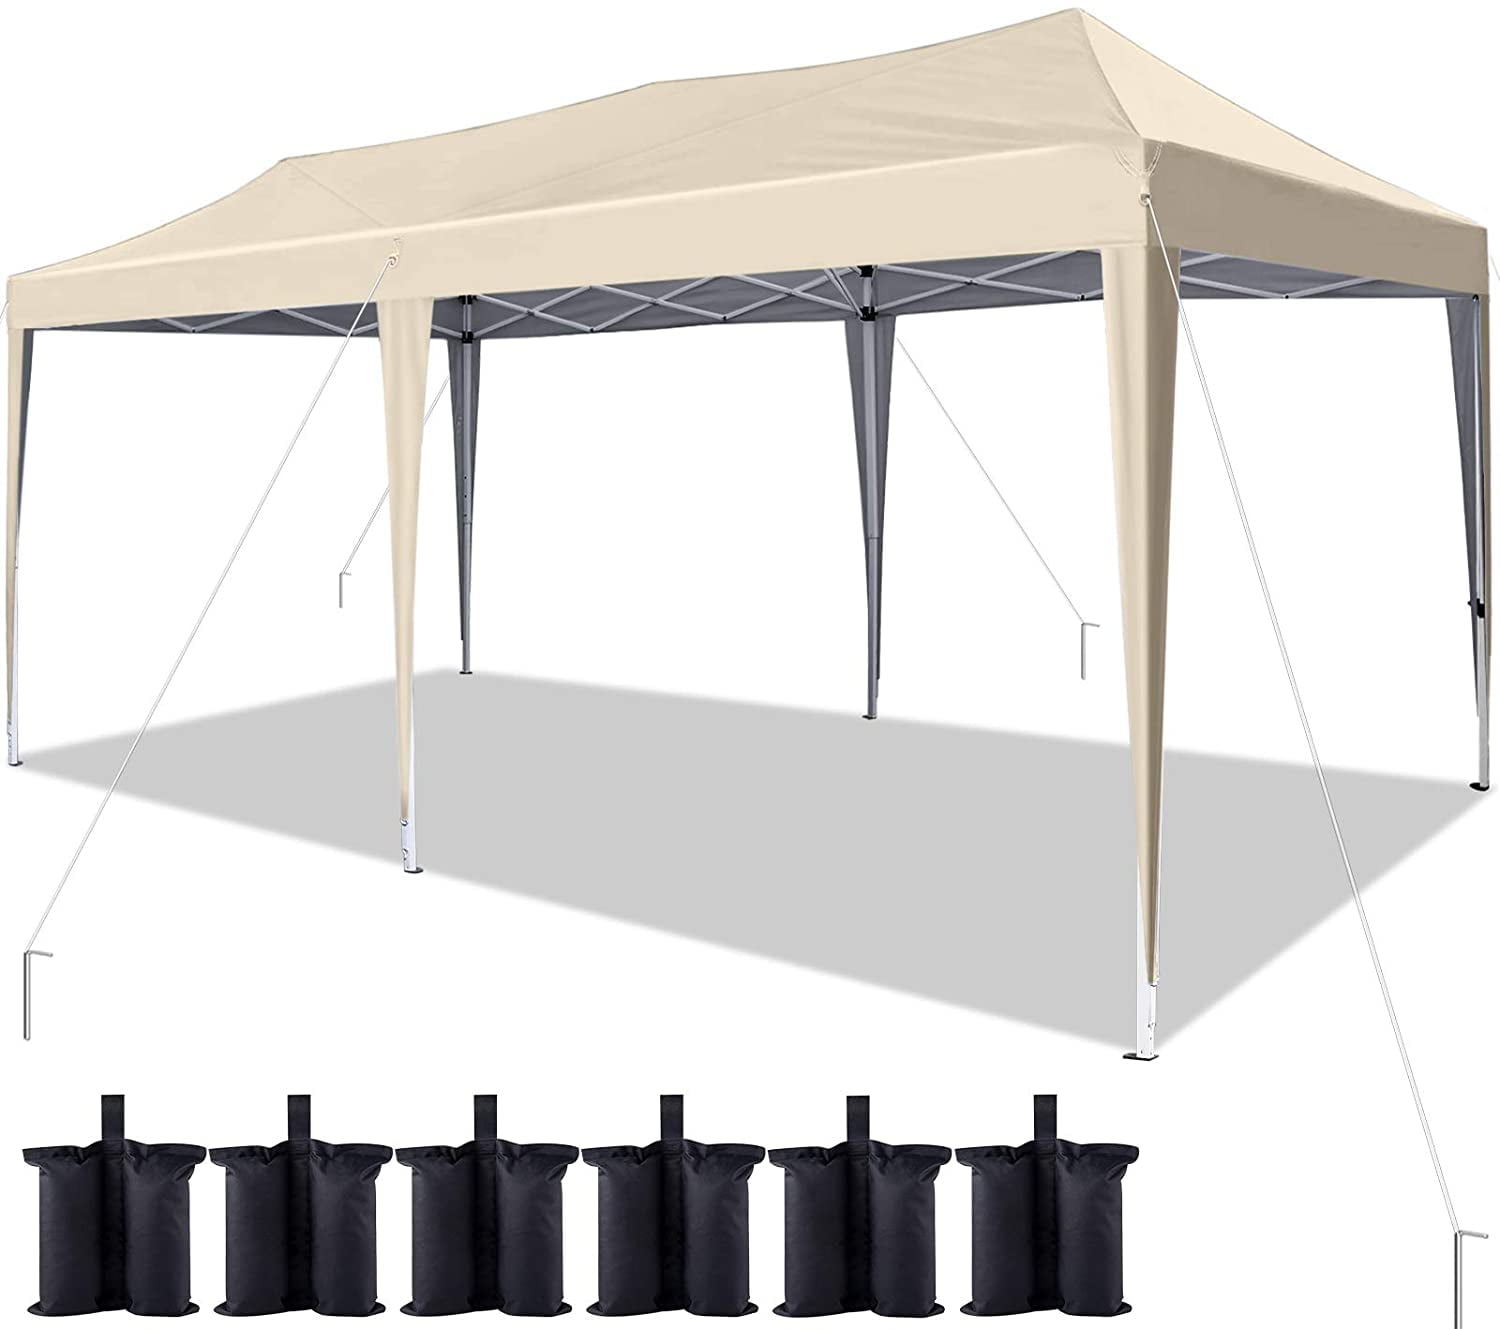 4Pc Pack Deluxe Bottle Weight Leg Feet For Ez Pop Up Canopy Outdoor Party Tent 